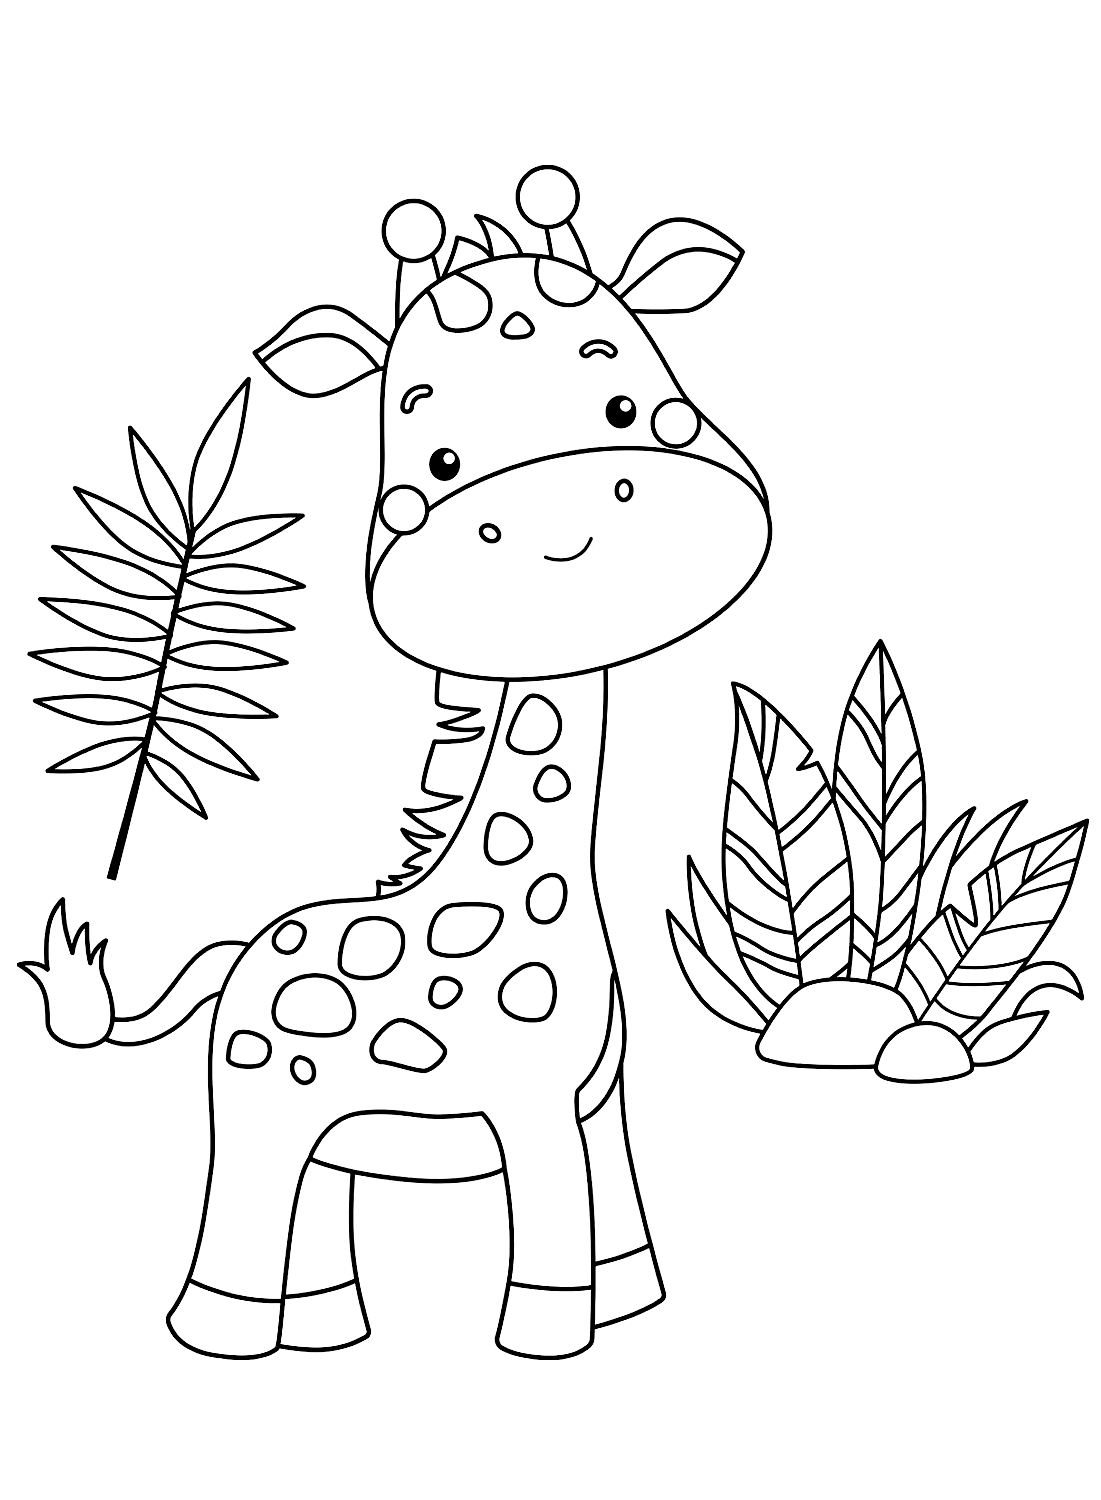 Baby Cute Giraffe coloring picture